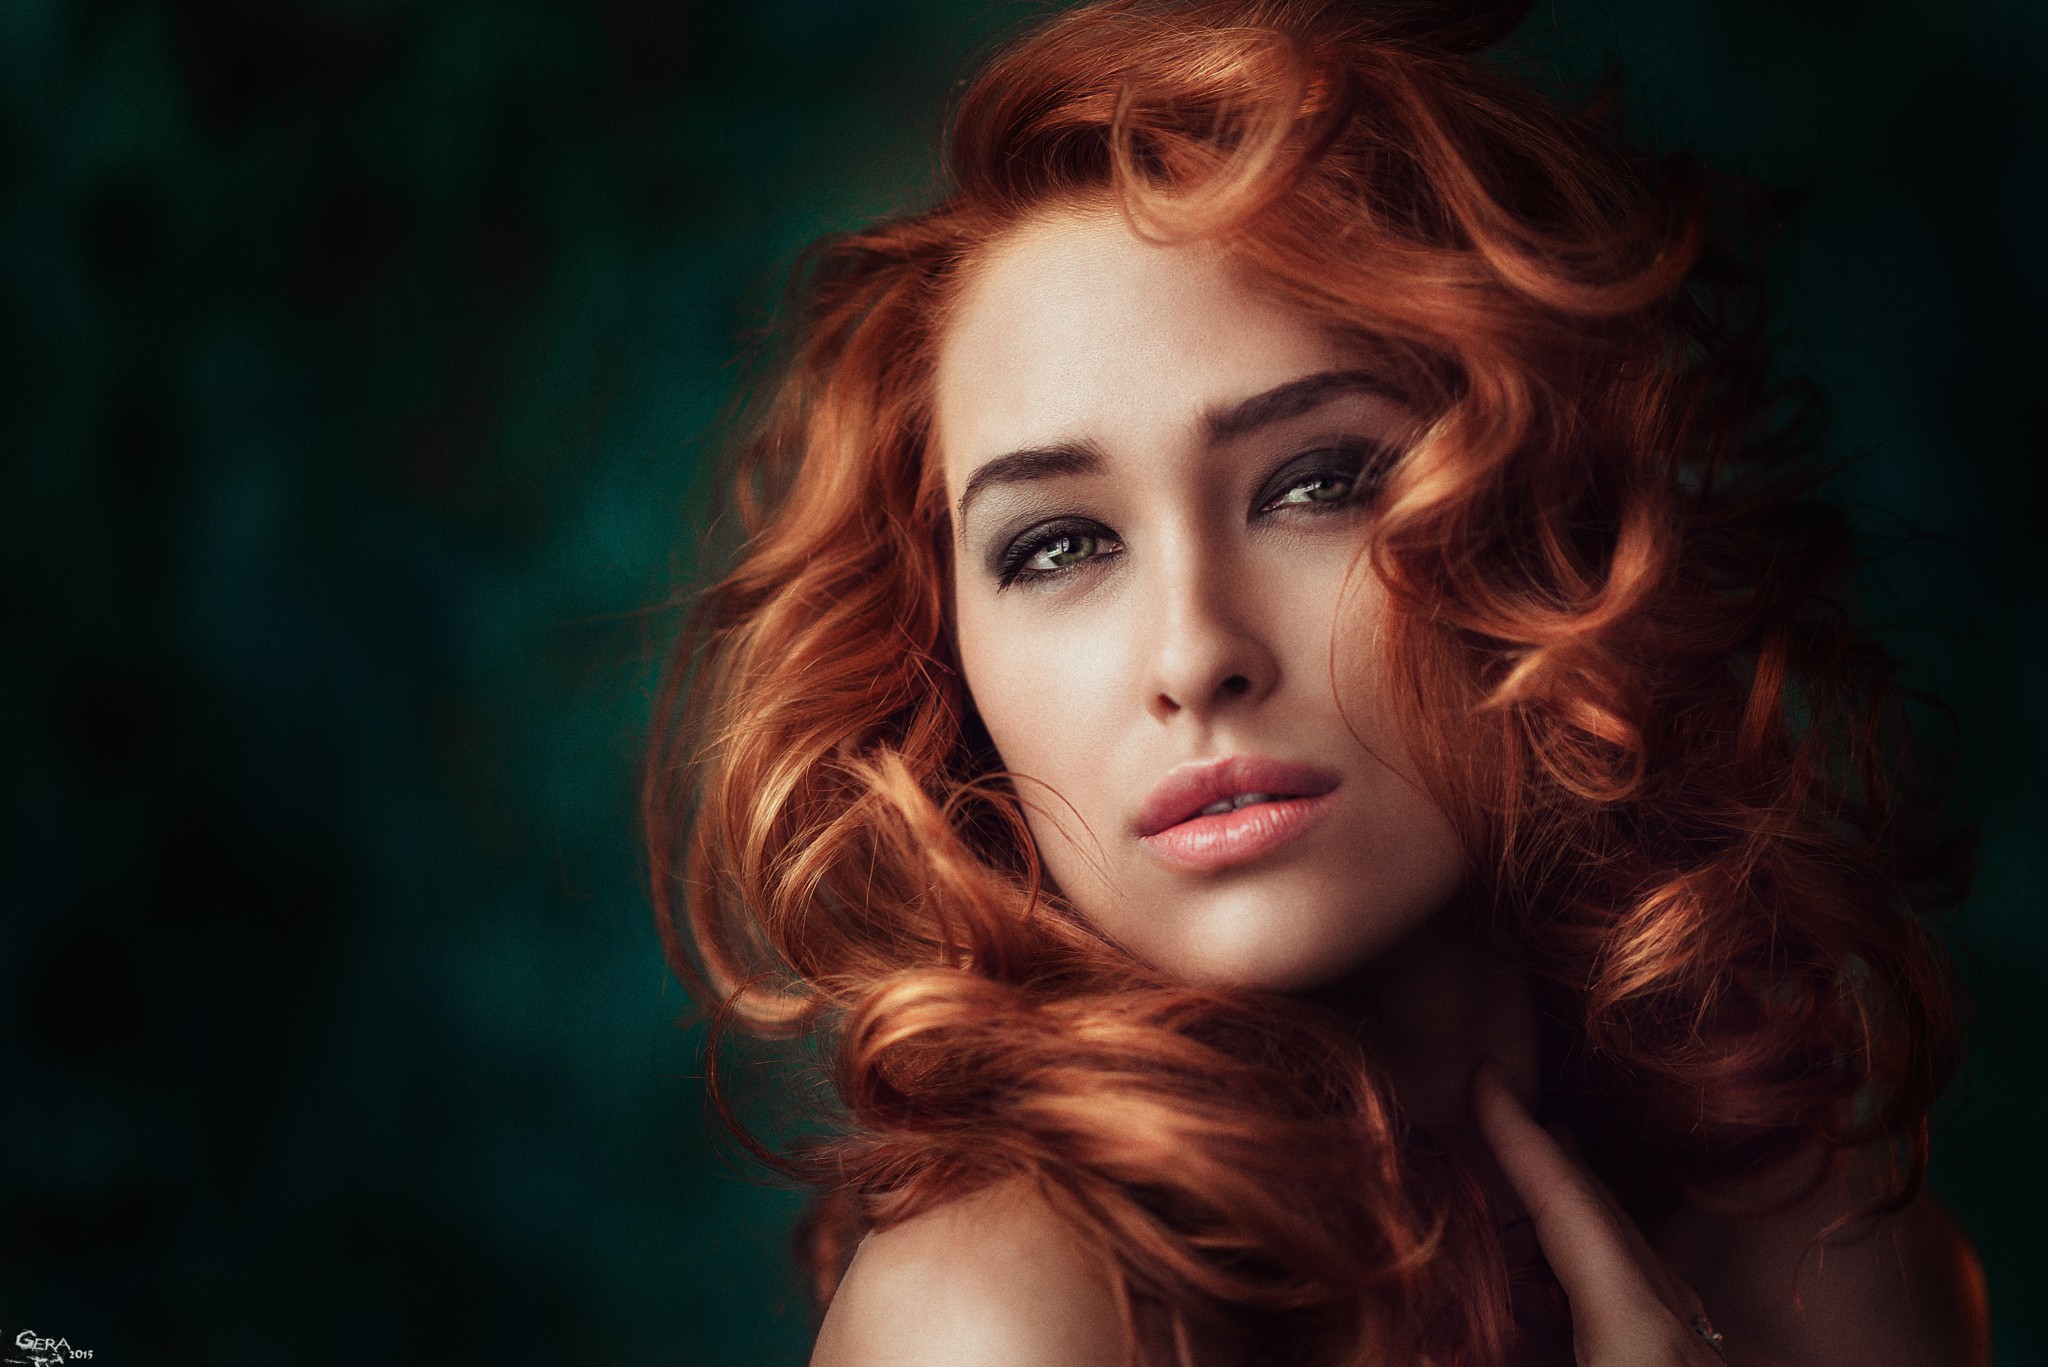 People 2048x1367 women model redhead curly hair green eyes portrait Georgy Chernyadyev face closeup dyed hair makeup looking at viewer 2015 (Year)